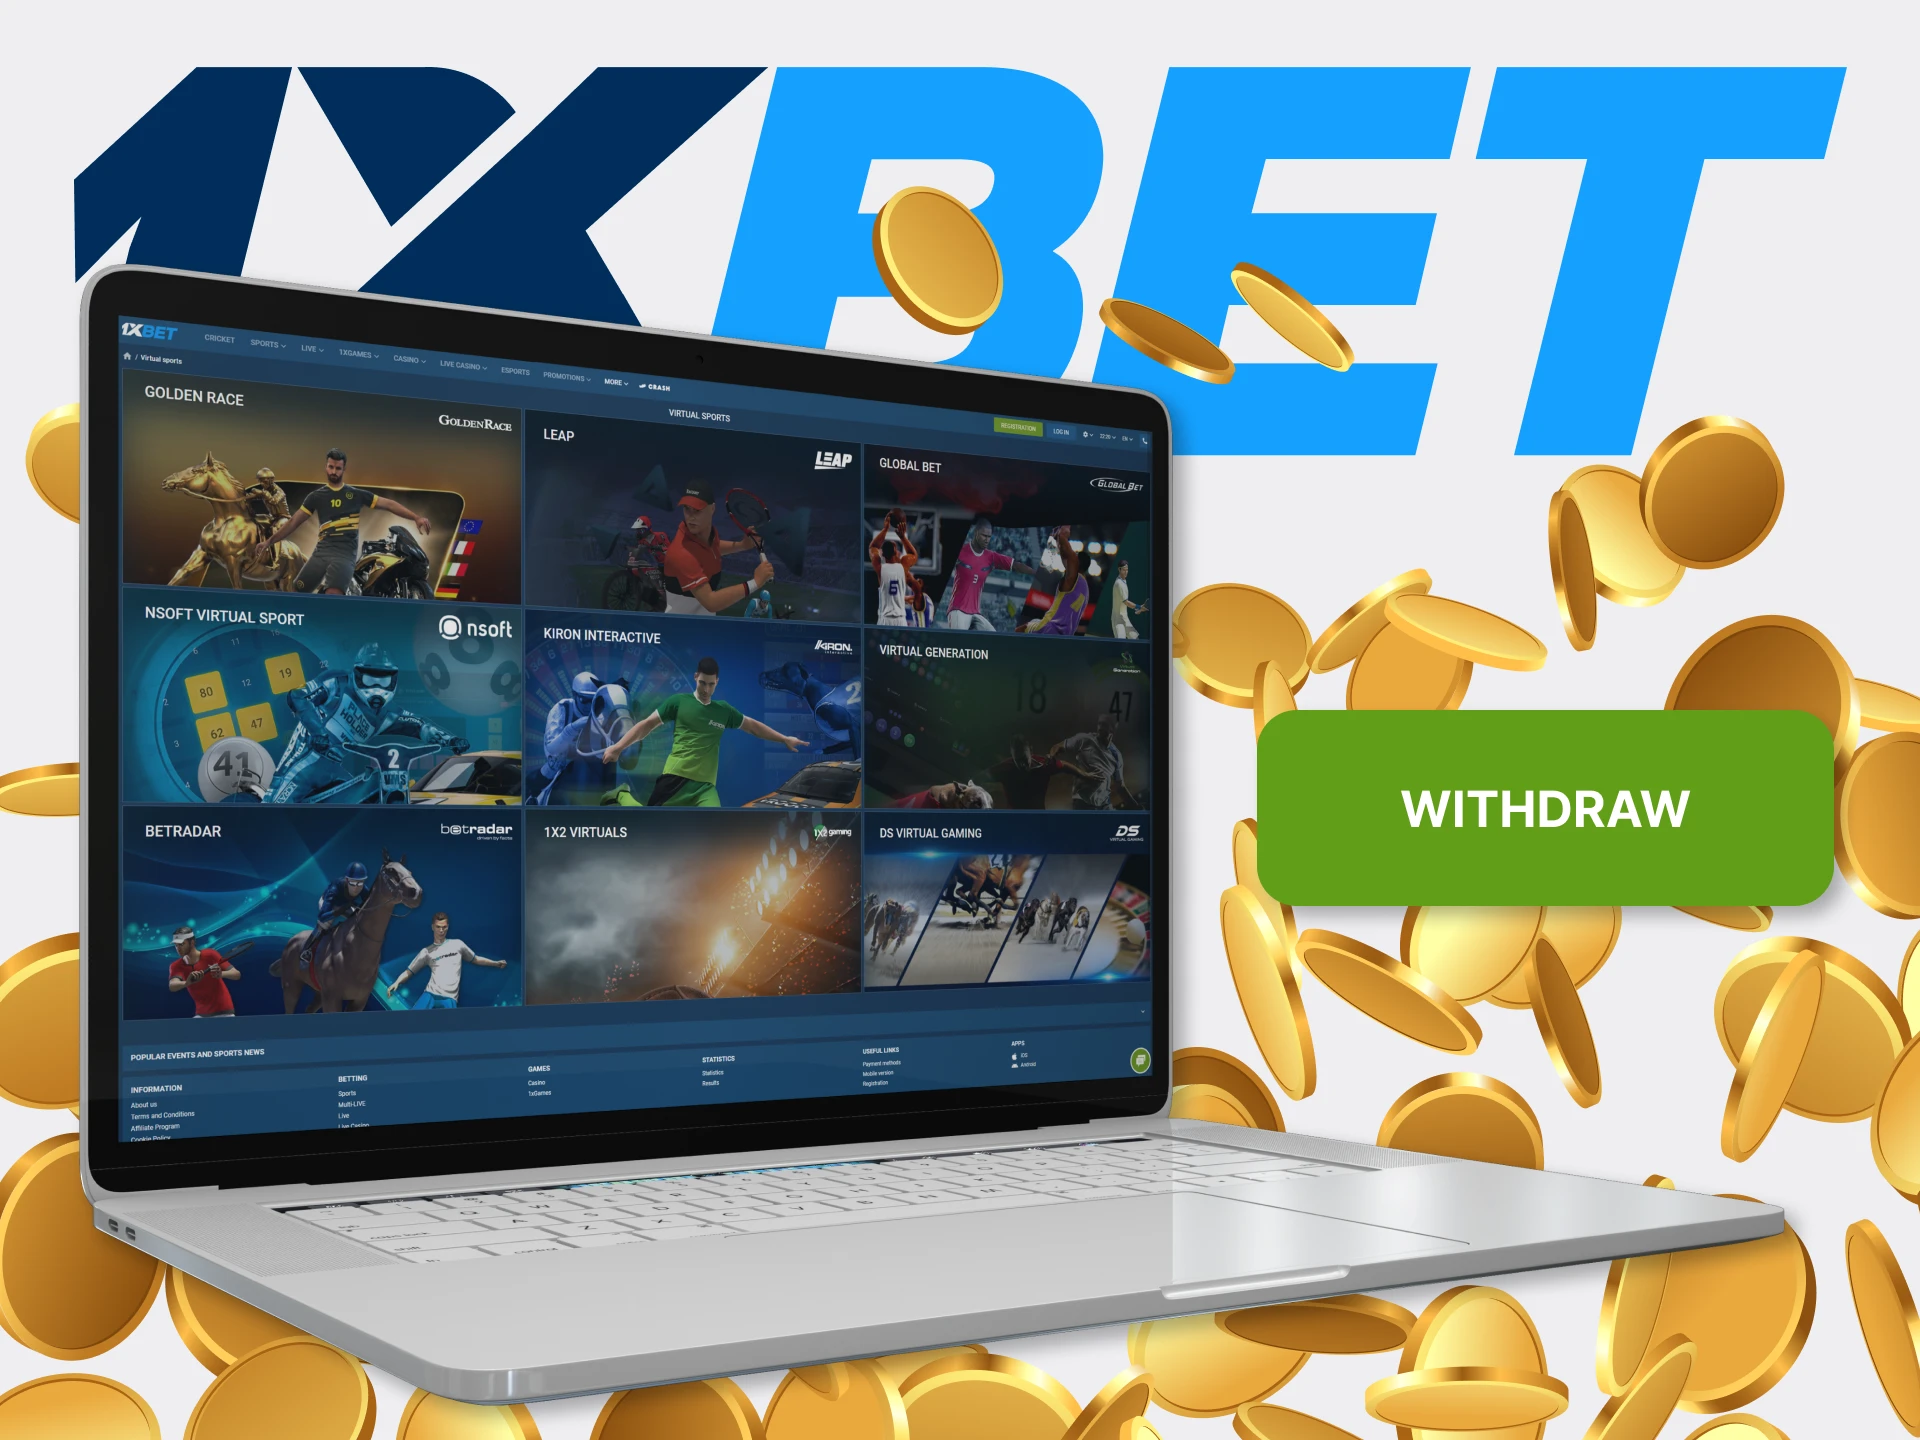 Easily deposit and withdraw your winnings from virtual sports betting with 1xBet.